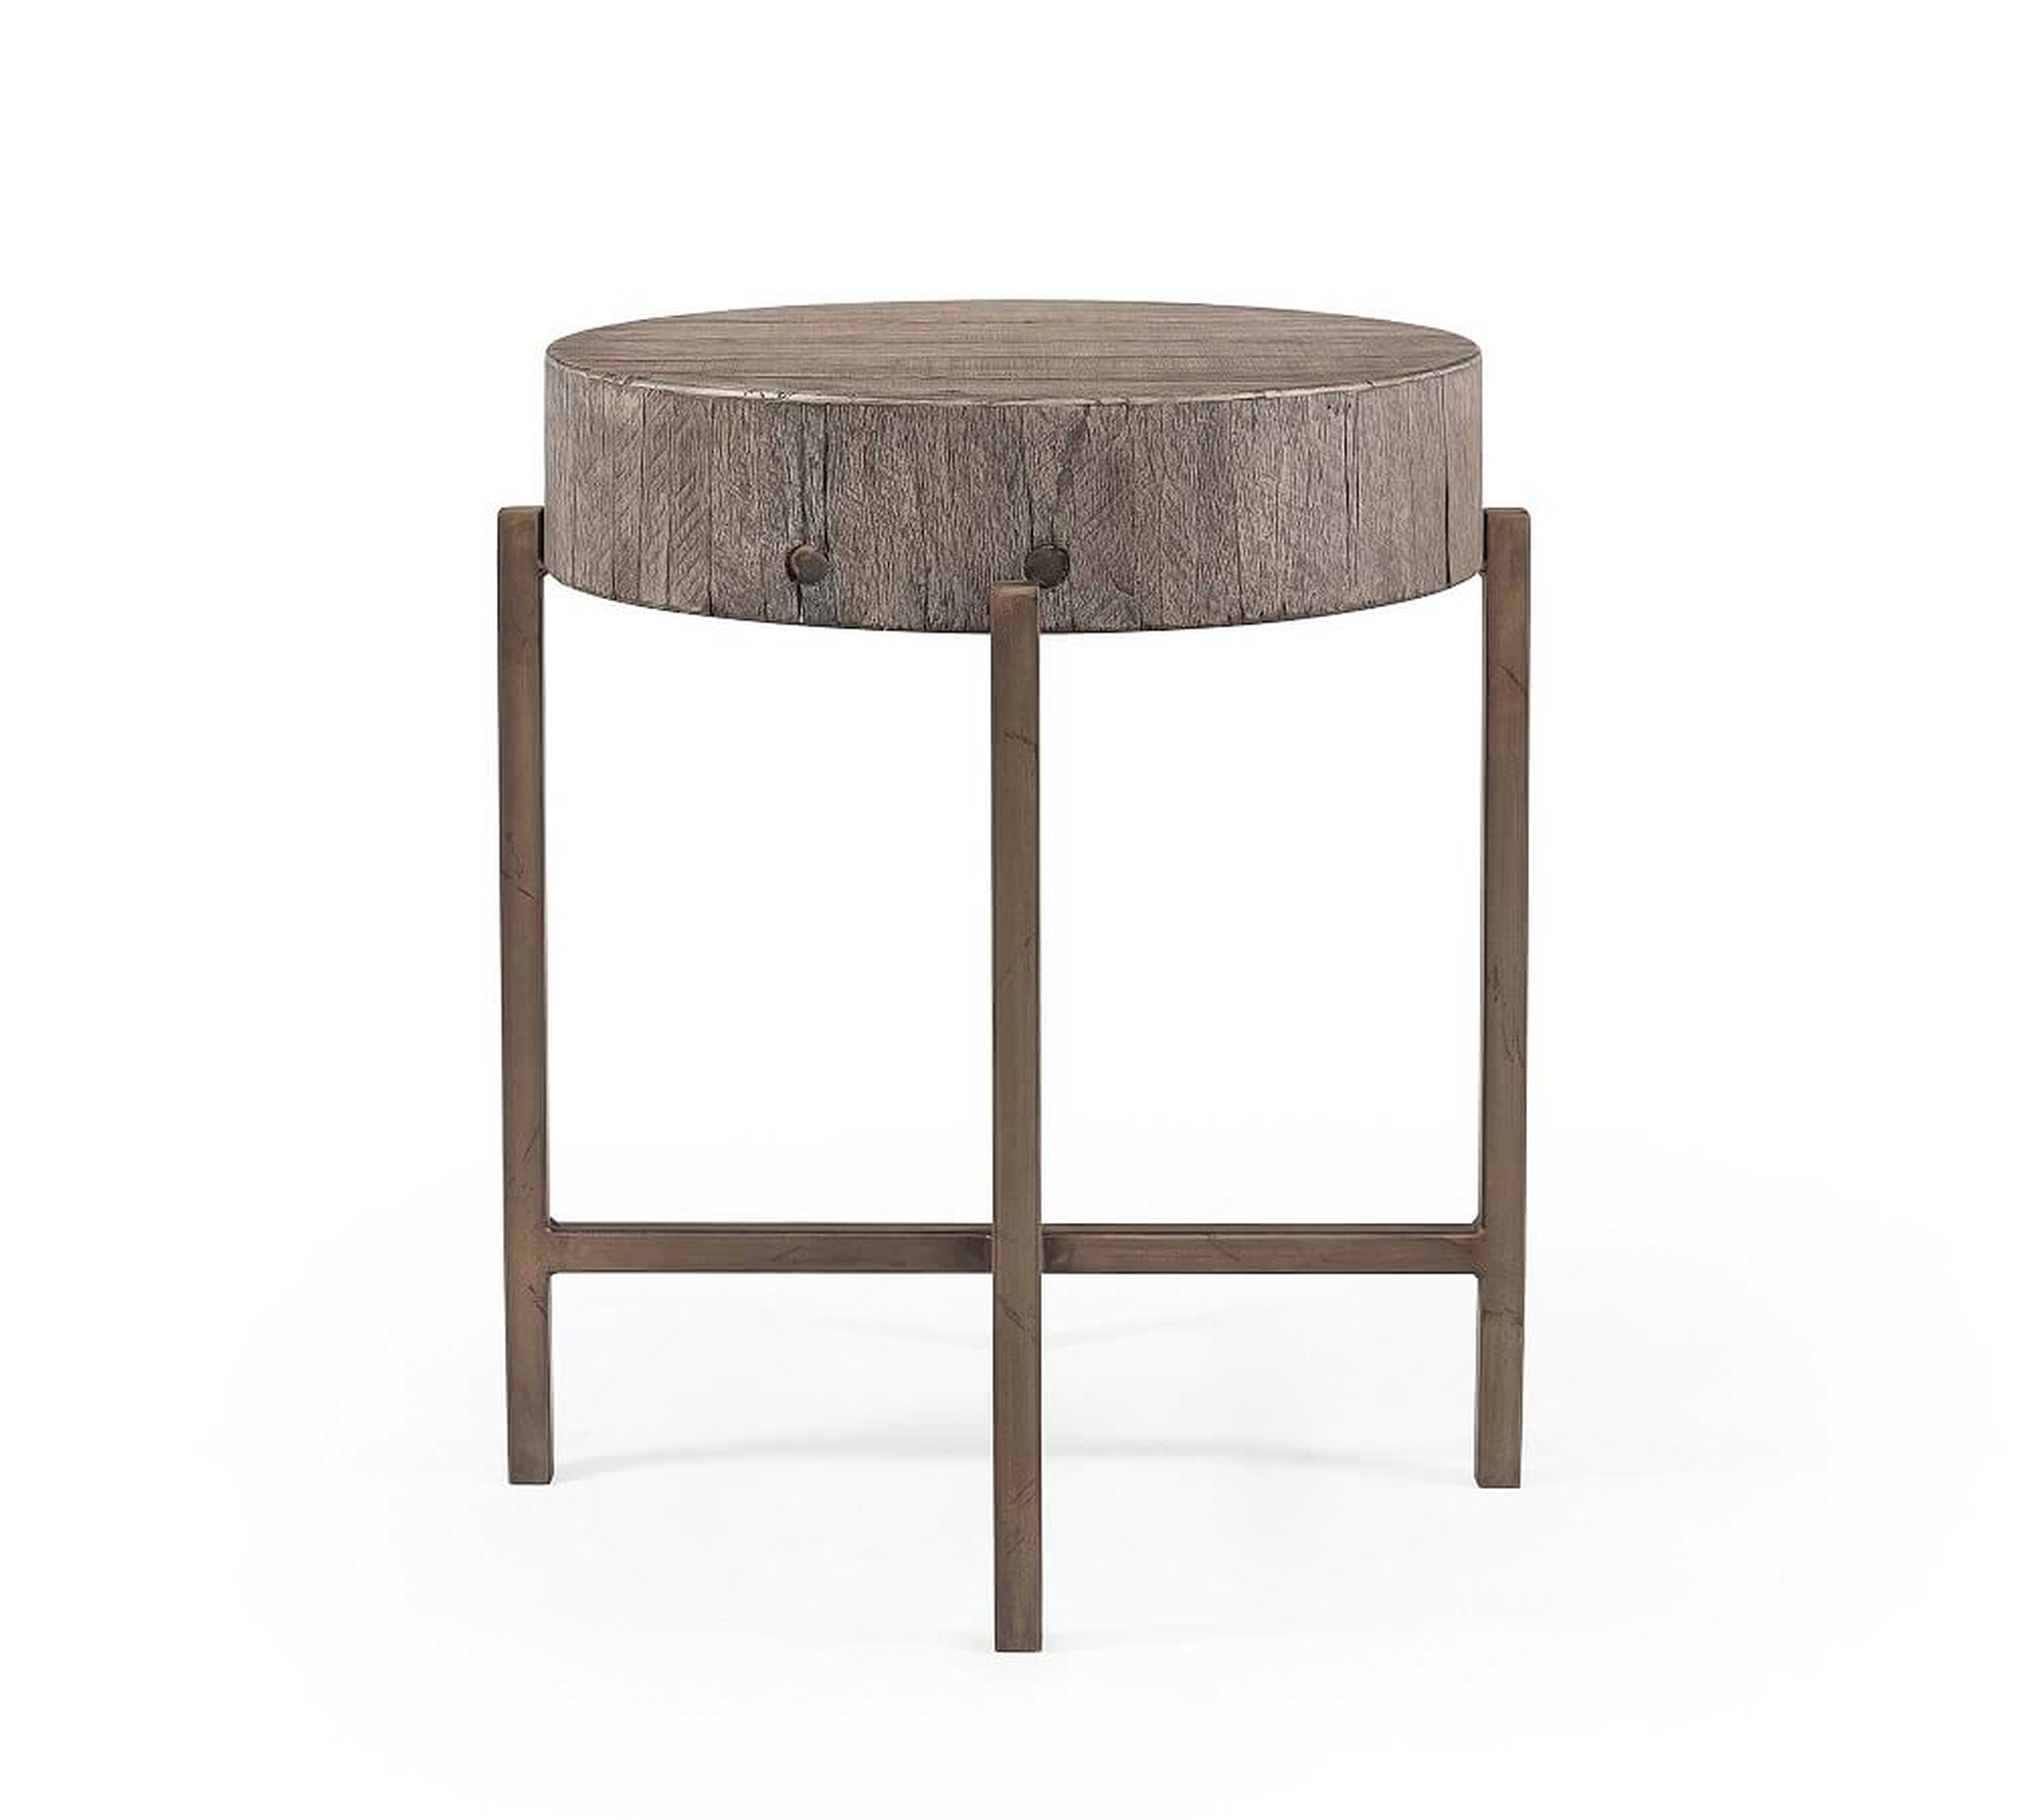 Fargo Reclaimed Wood Round End Table, Distressed Gray - Pottery Barn